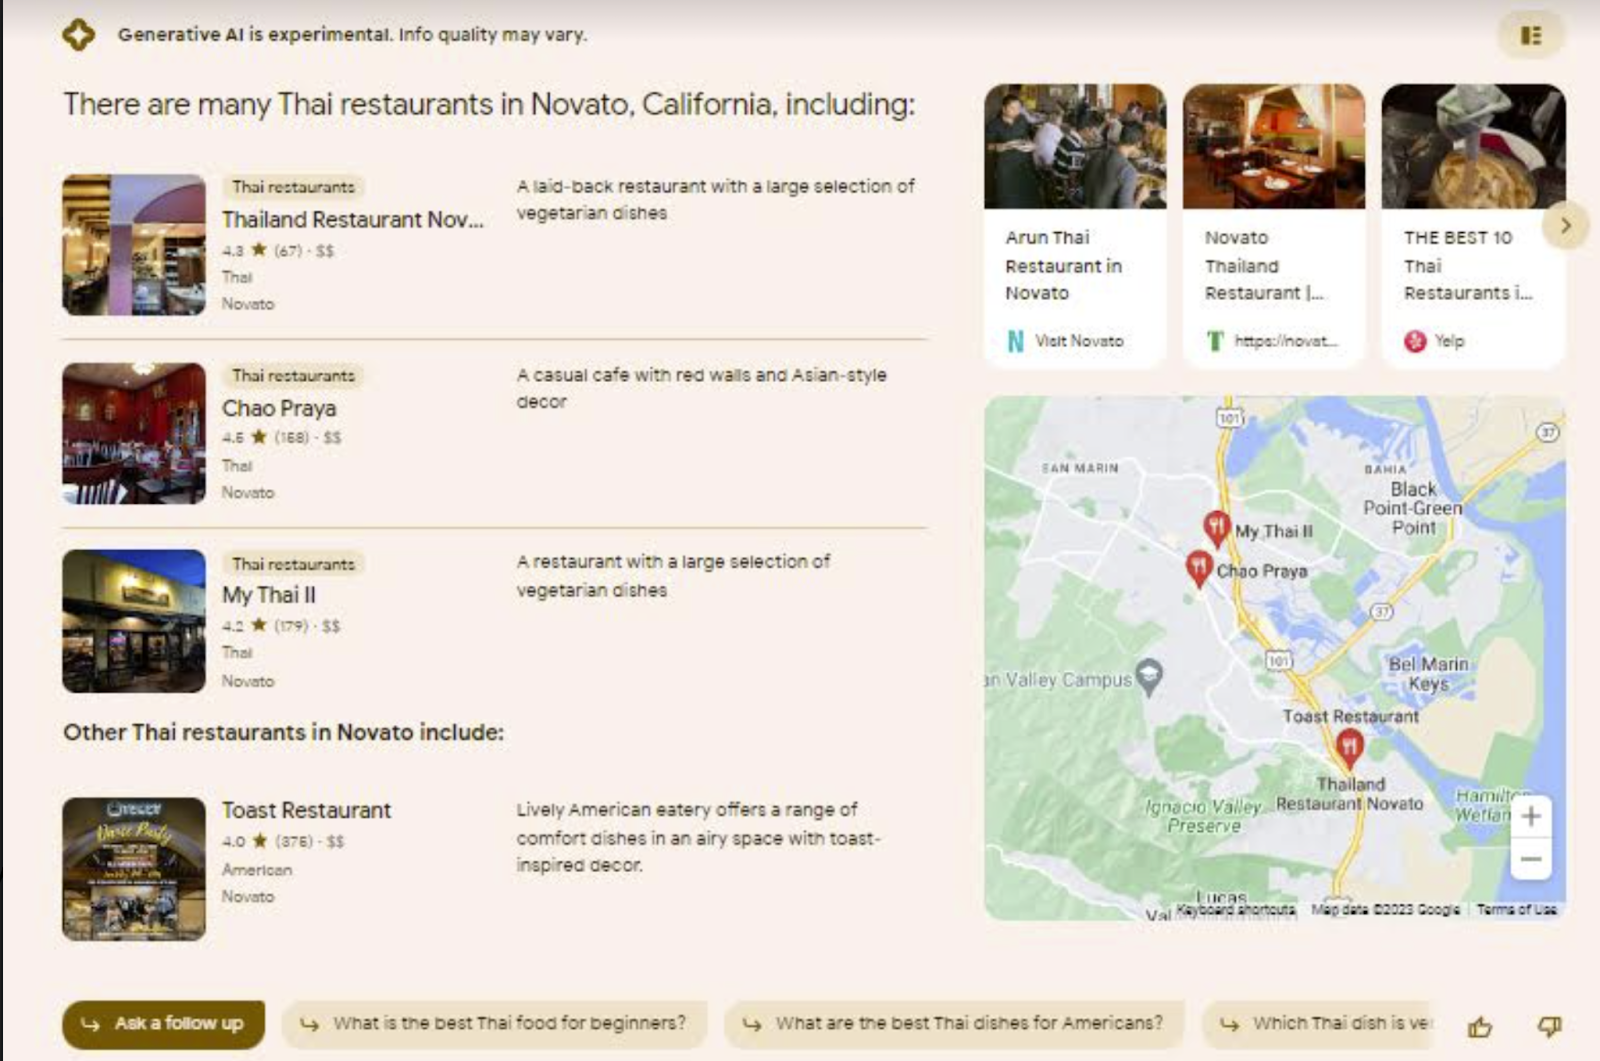 SGE pack listing Thai restaurants in Novato. The pack consists of a list of 3 businesses followed by a fourth business. There are photos, a map, a carousel of links to other sources and a set of buttons prompting the searcher to ask further questions.